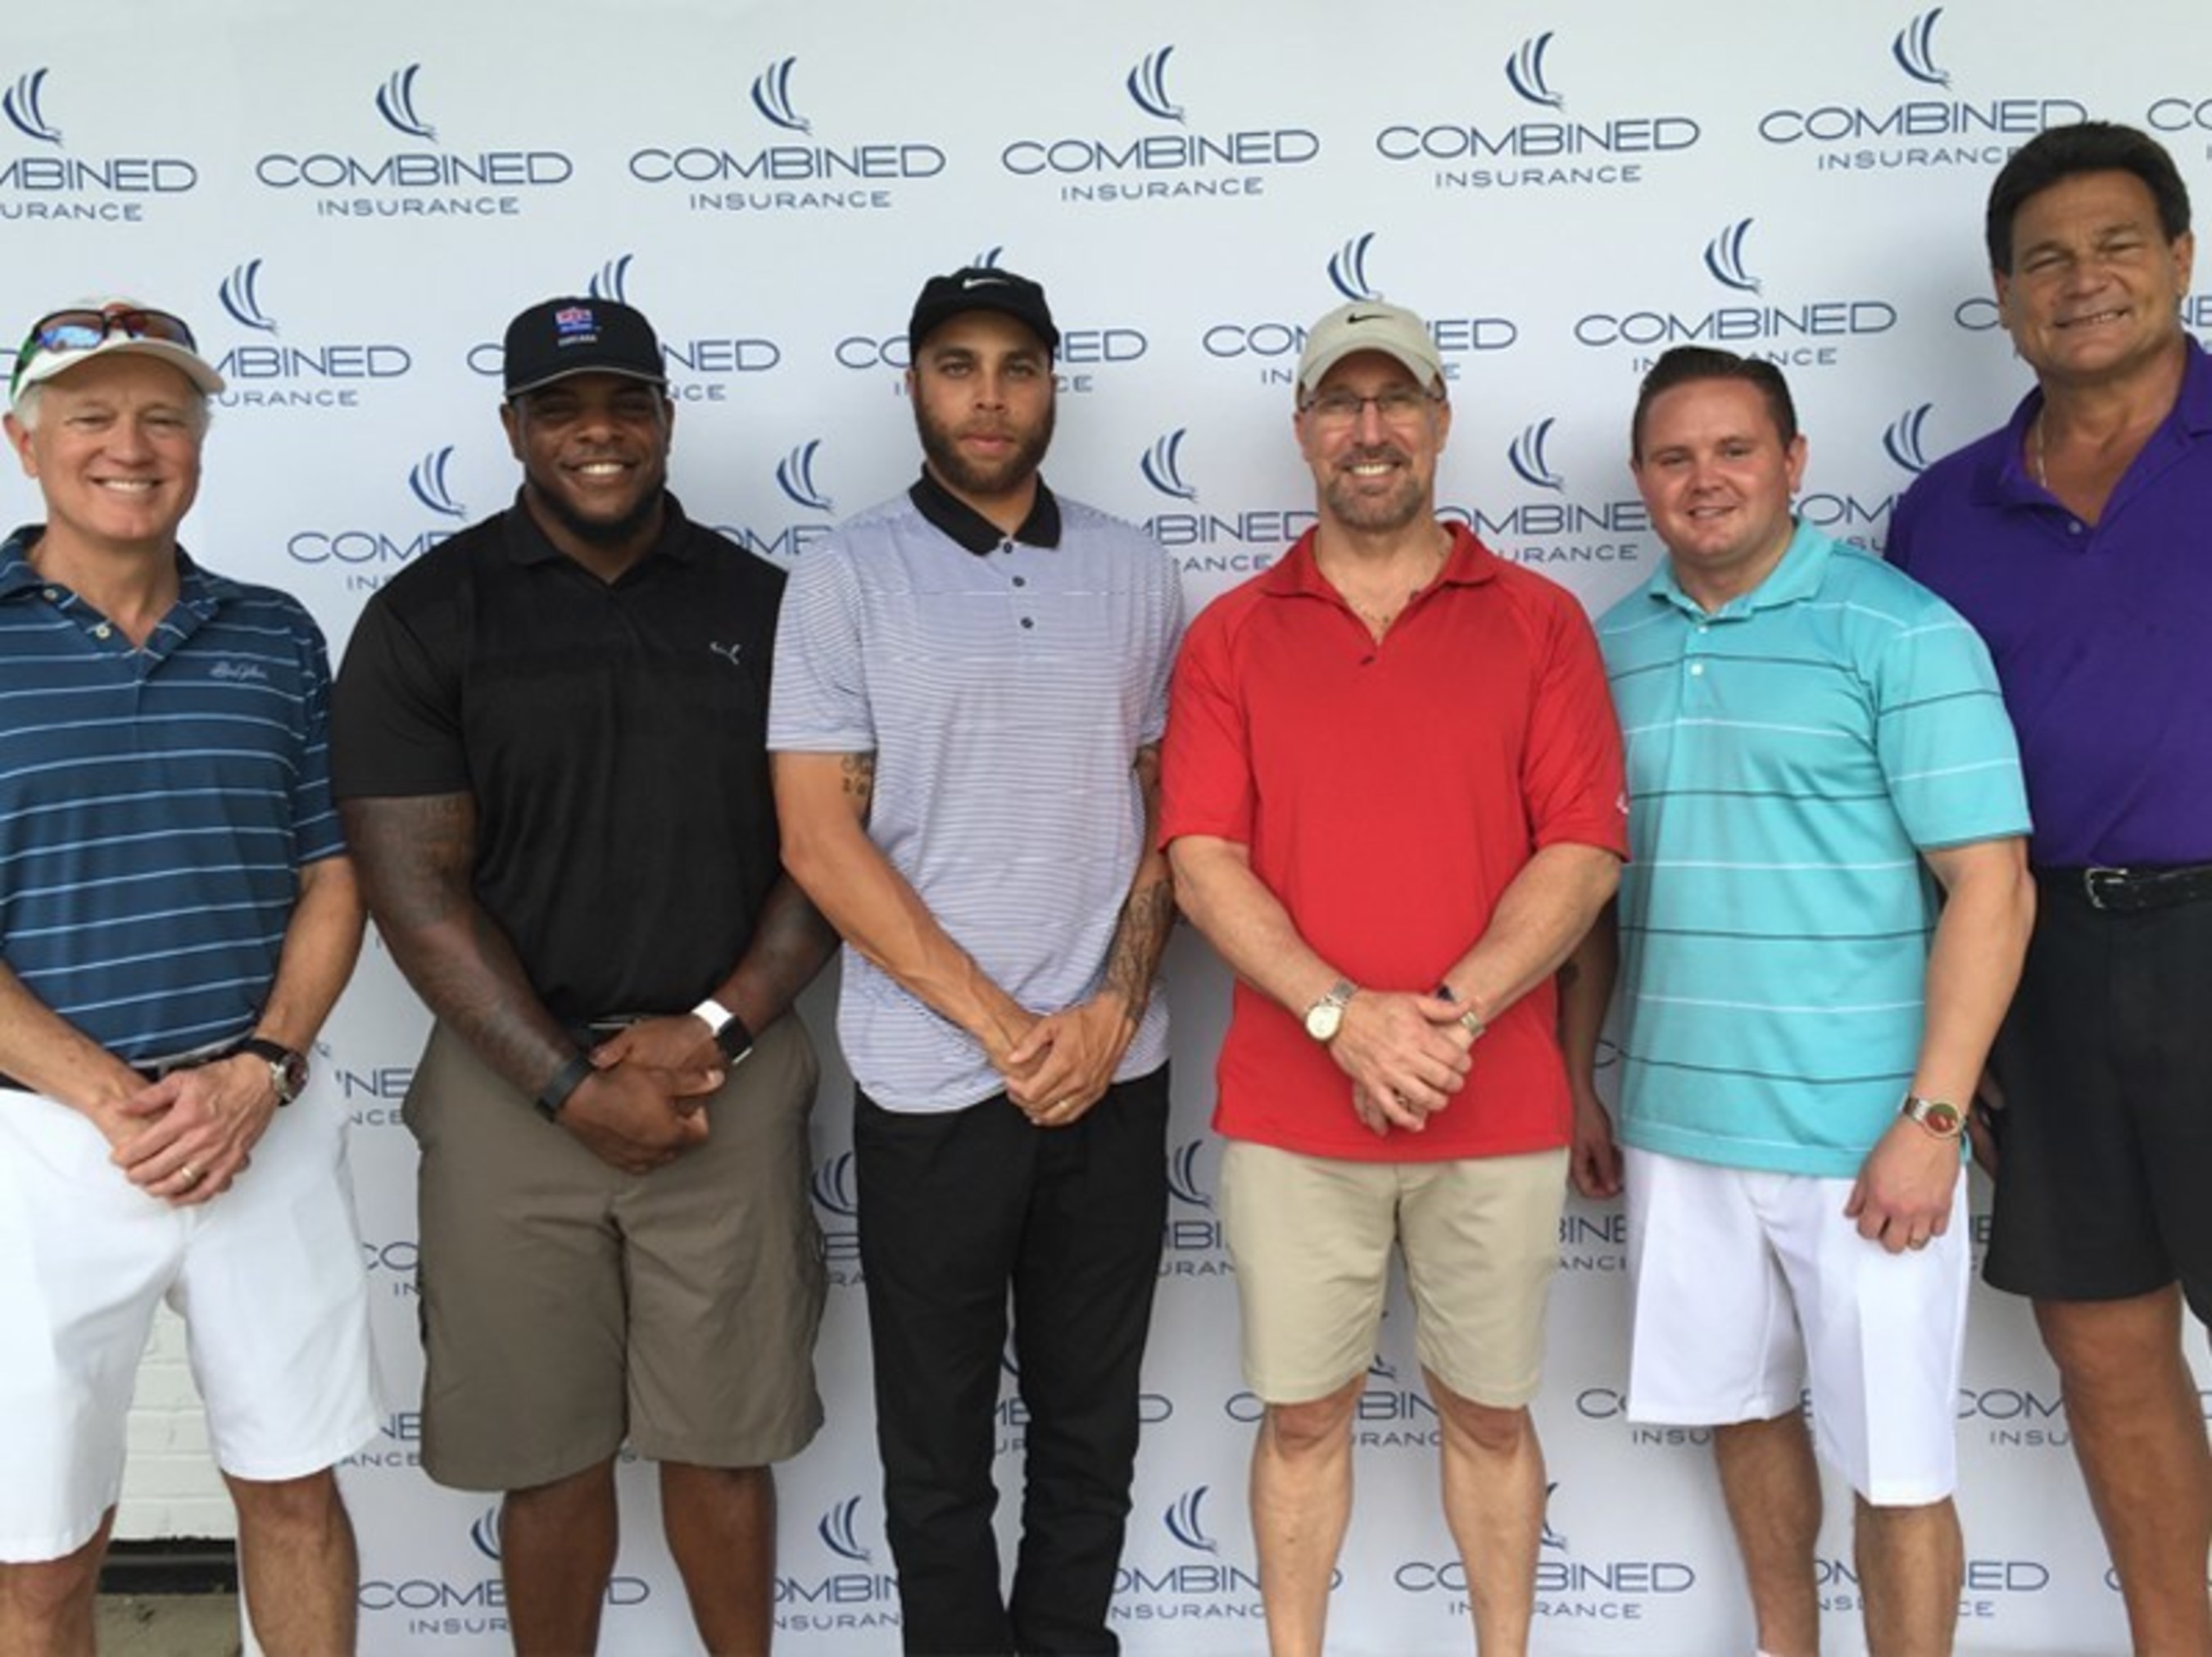 (L to R) Ed Clancy, Executive Vice President, Global Accident & Health and Life, Chubb Group, Jason McKie, Johnny Knox, Brad Bennett, President, Combined Insurance, Joseph Pennington, National Military Program Manager, Combined Insuance, and Dan Hampton give back at the Combined Insurance Golf Outing to benefit The Jason McKie Foundation.